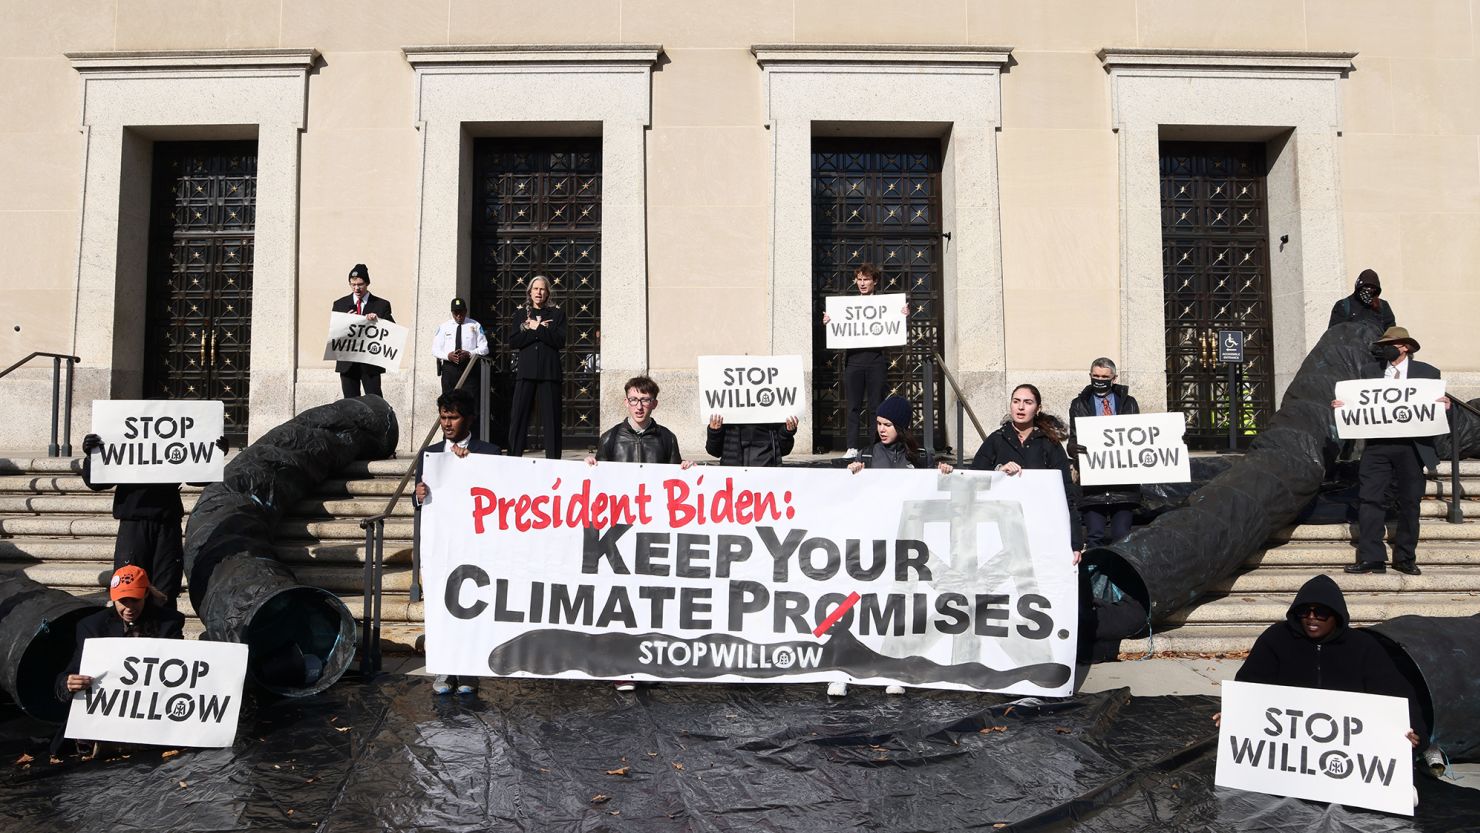 WASHINGTON, DC - NOVEMBER 17: Climate activist hold a demonstration to urge President Biden to reject the Willow Project at the US Department of Interior on November 17, 2022 in Washington, DC. (Photo by Jemal Countess/Getty Images for Sunrise AU)